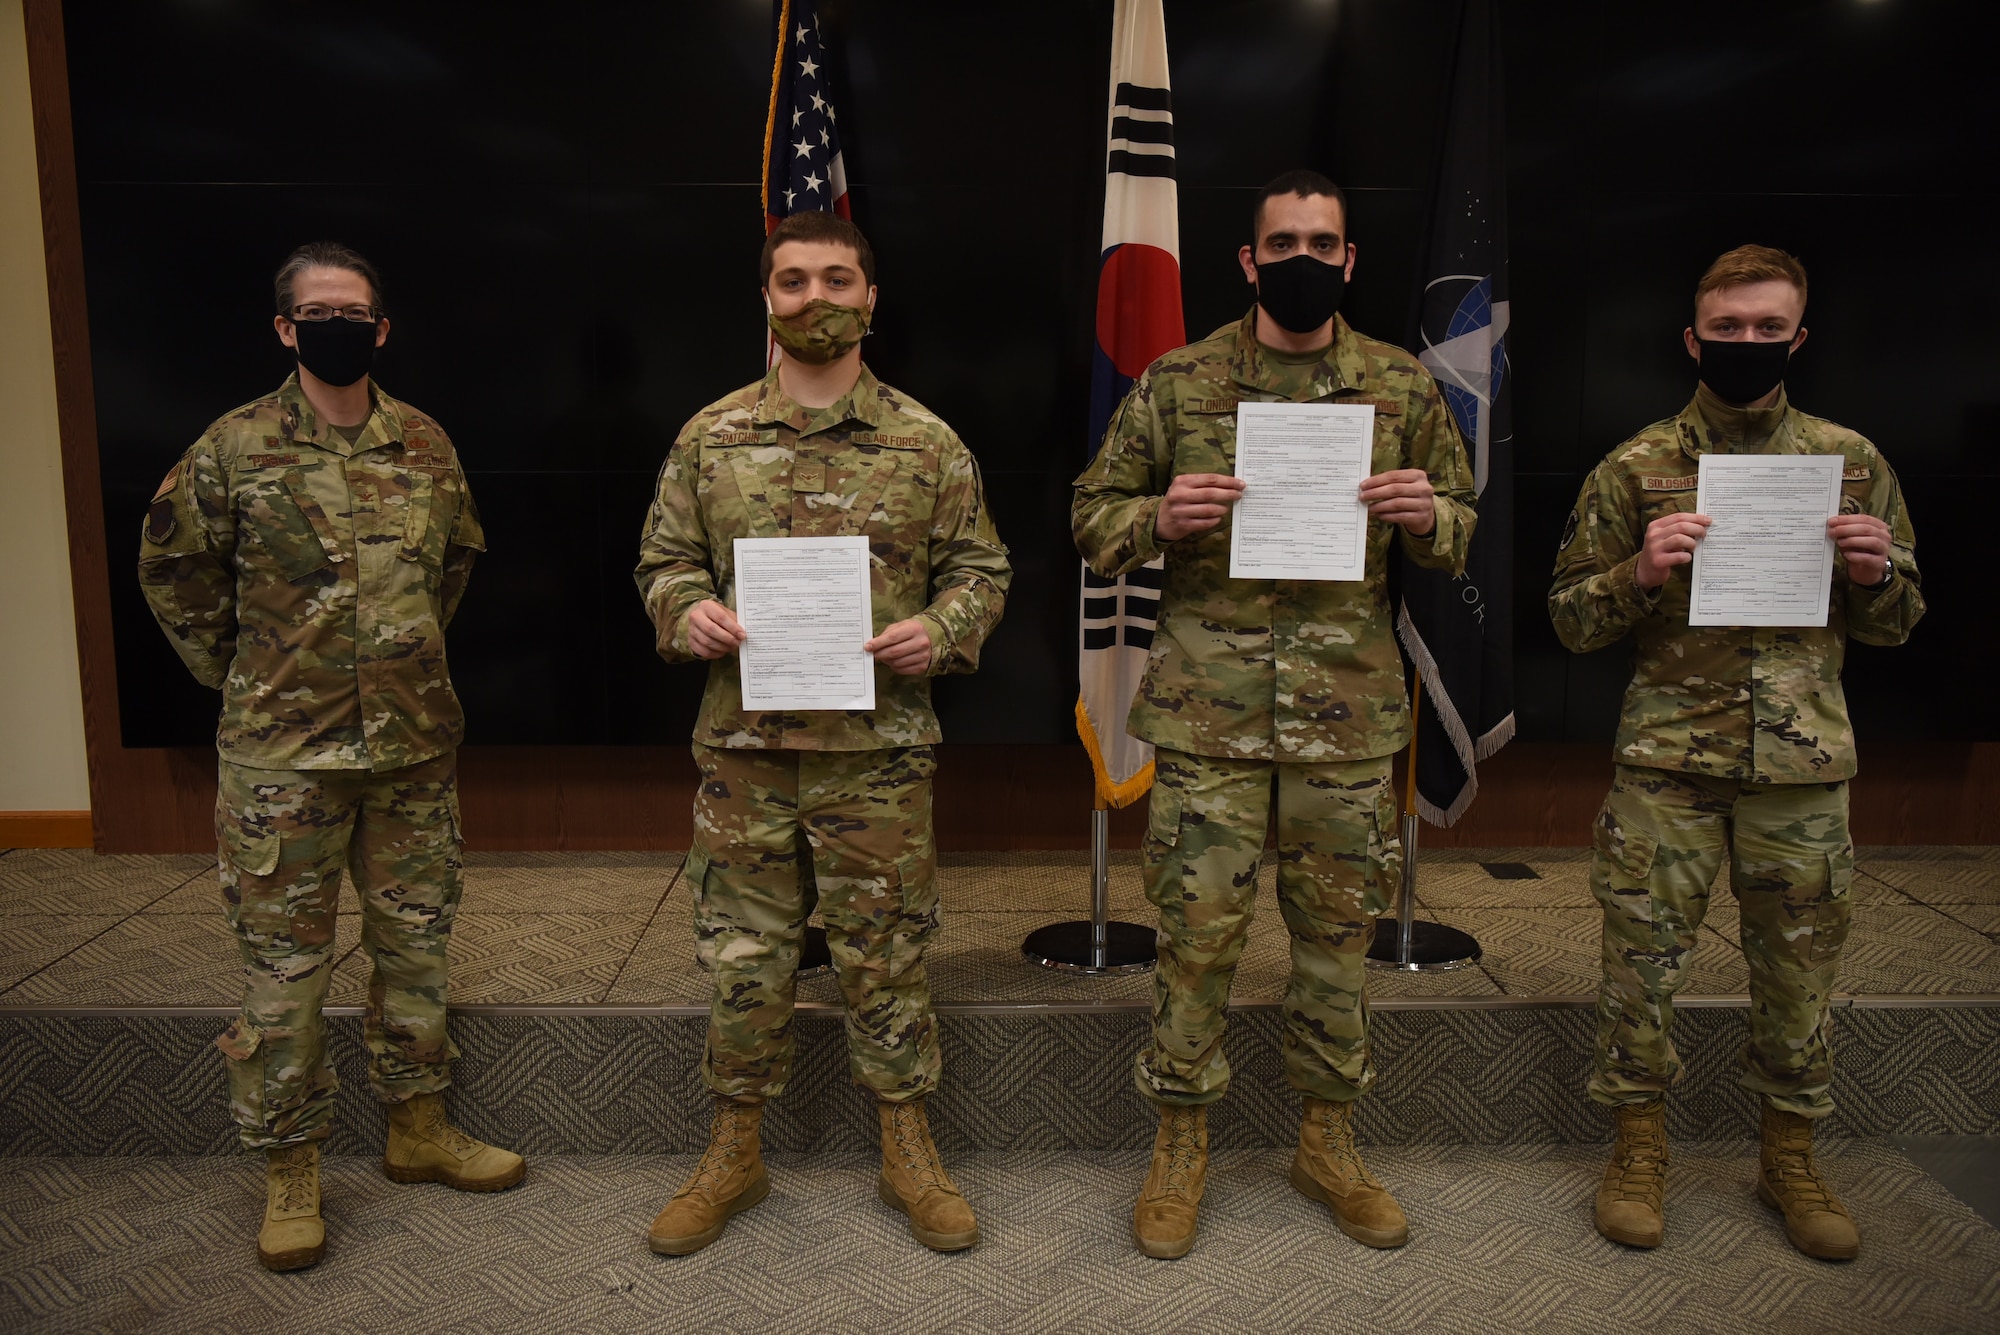 Colonel Jennifer Phelps stands with Airman 1st Class Anton Soloshenko, Airman 1st Class Emmanuel Londono, and Airman Nickolai Patchin as they show their signed Form 4, transferring them to the U.S. Space Force, at Kunsan Air Base, Republic of Korea Feb. 1, 2021.